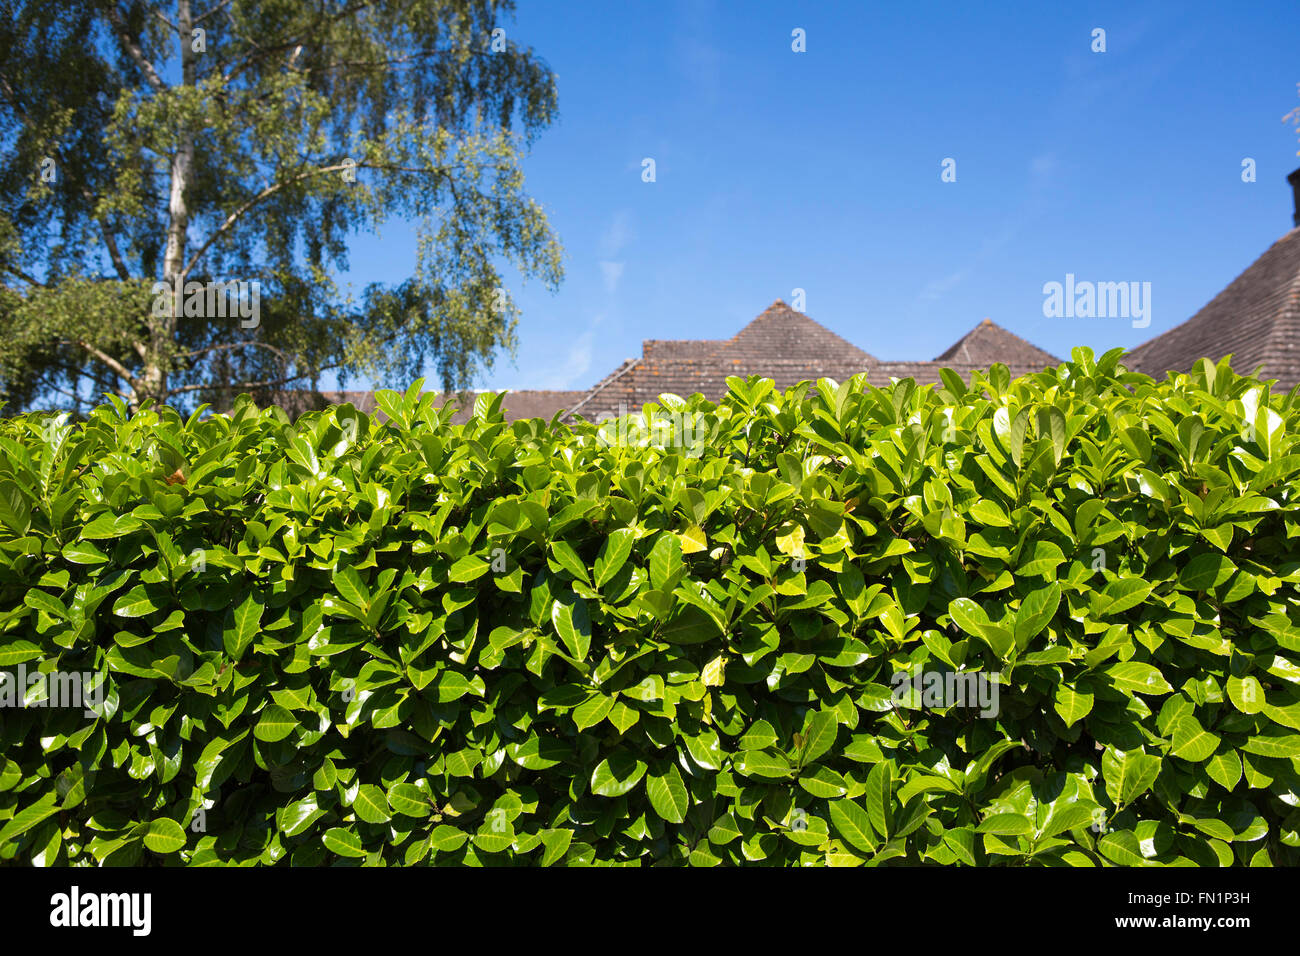 The roof of a large house half hidden behind a dry stone wall and large green leafy hedge. Stock Photo